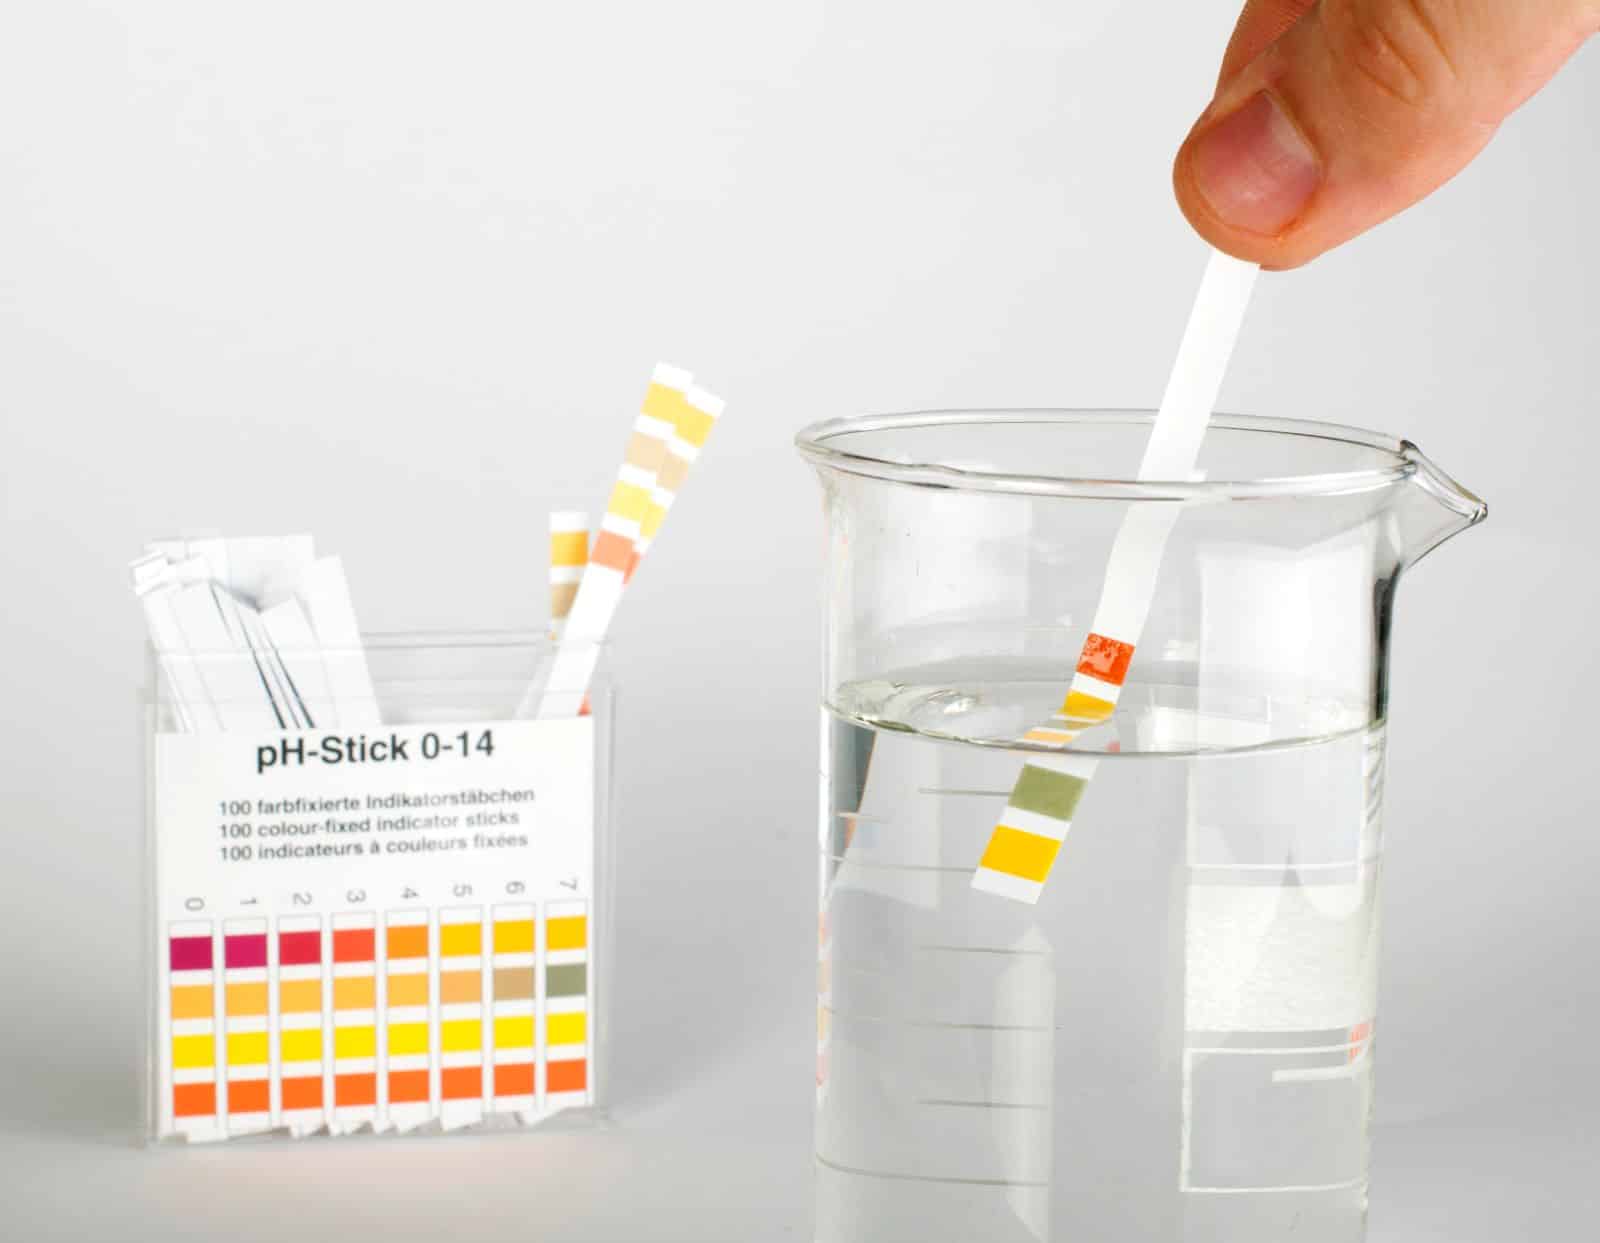 water management ph testing strips being used in beaker of water